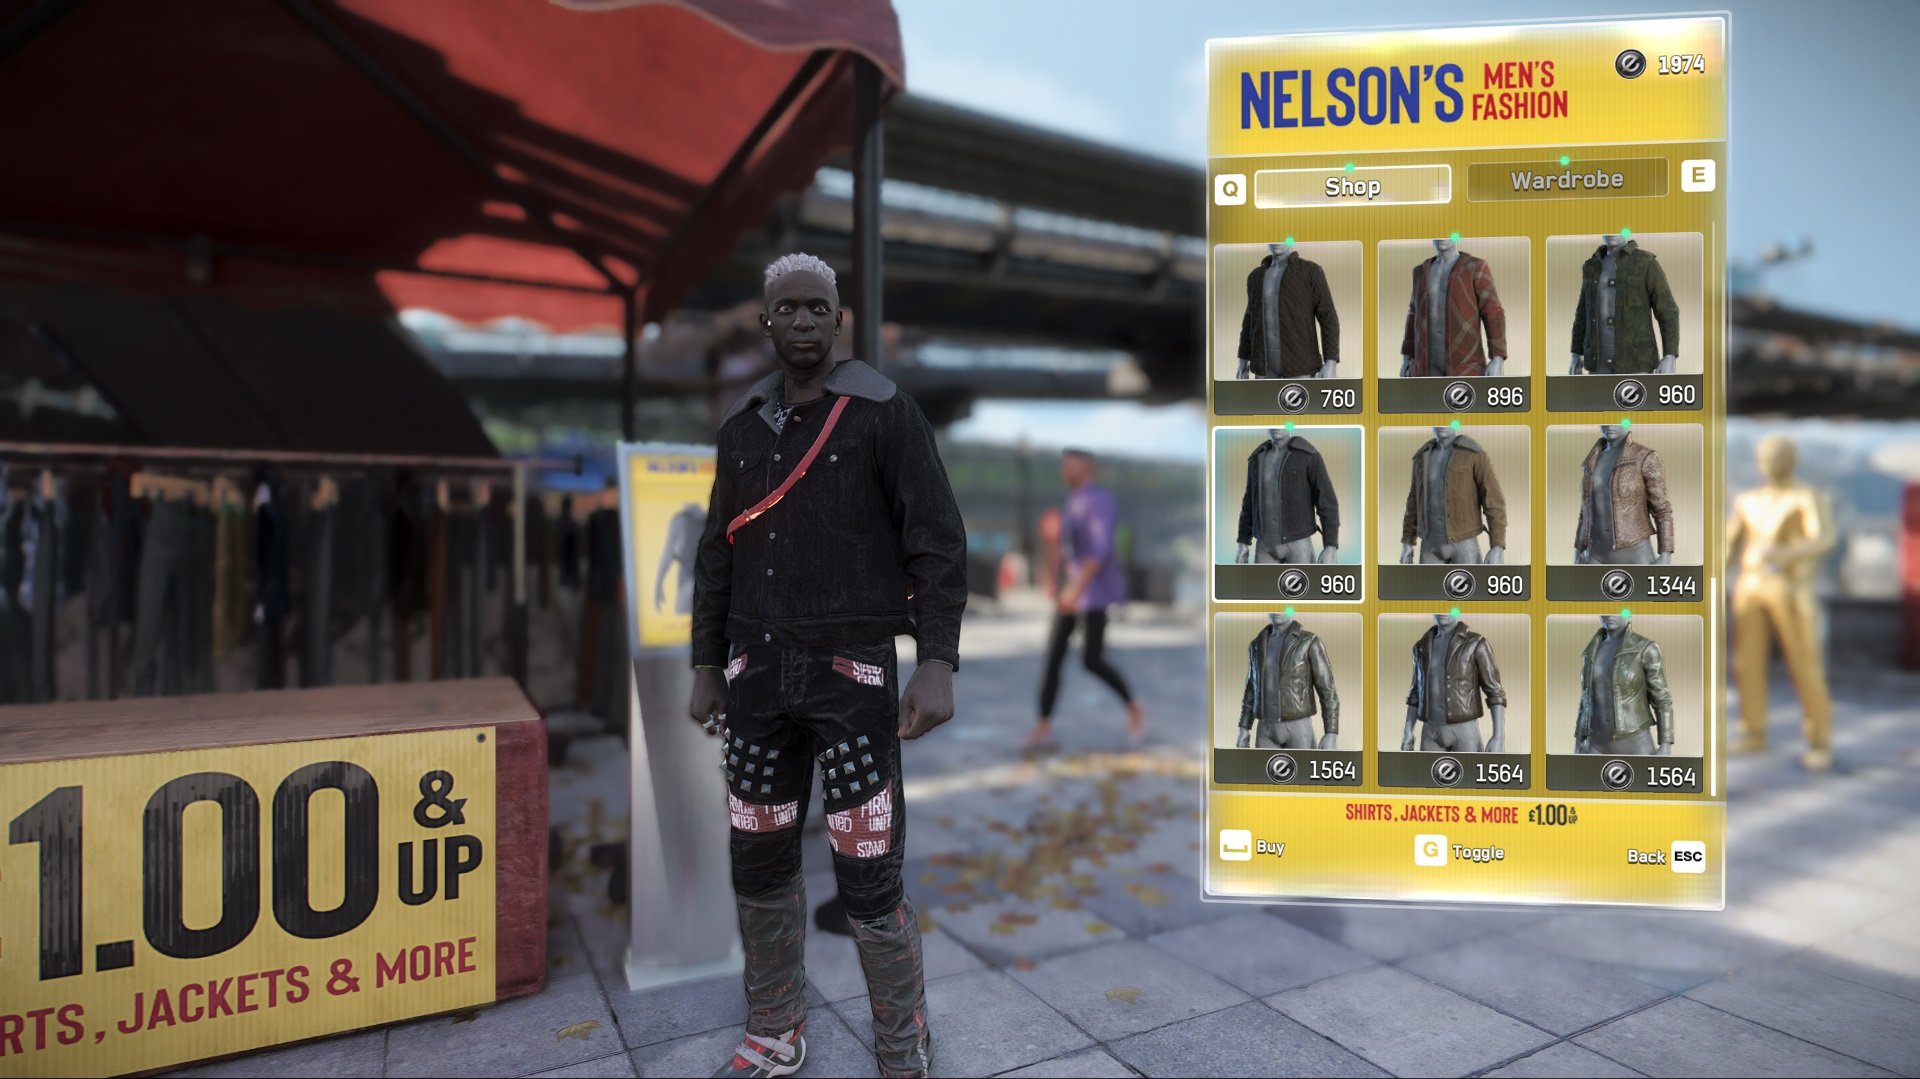 Watch Dogs Legion Clothing Nelsons